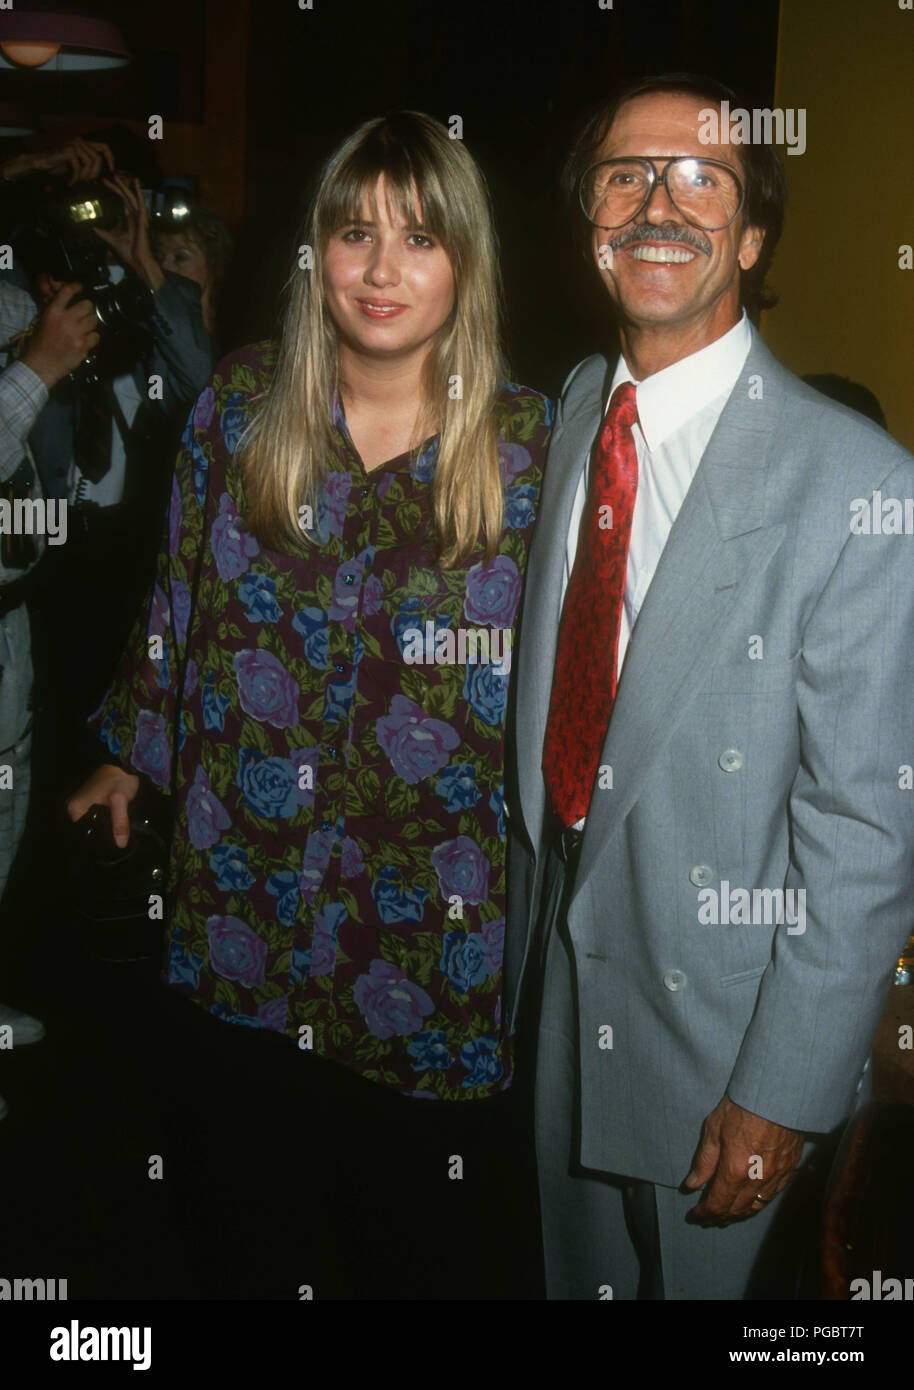 WEST HOLLYWOOD, CA - AUGUST 11: (L-R) Chastity Bono (Chaz Bono) and father Sonny Bono attend Grand Opening of Bono's Restaurant on August 11, 1992 at Bono's Restaurant on Melrose Avenue in West Hollywood, California. Photo by Barry King/Alamy Stock Photo Stock Photo